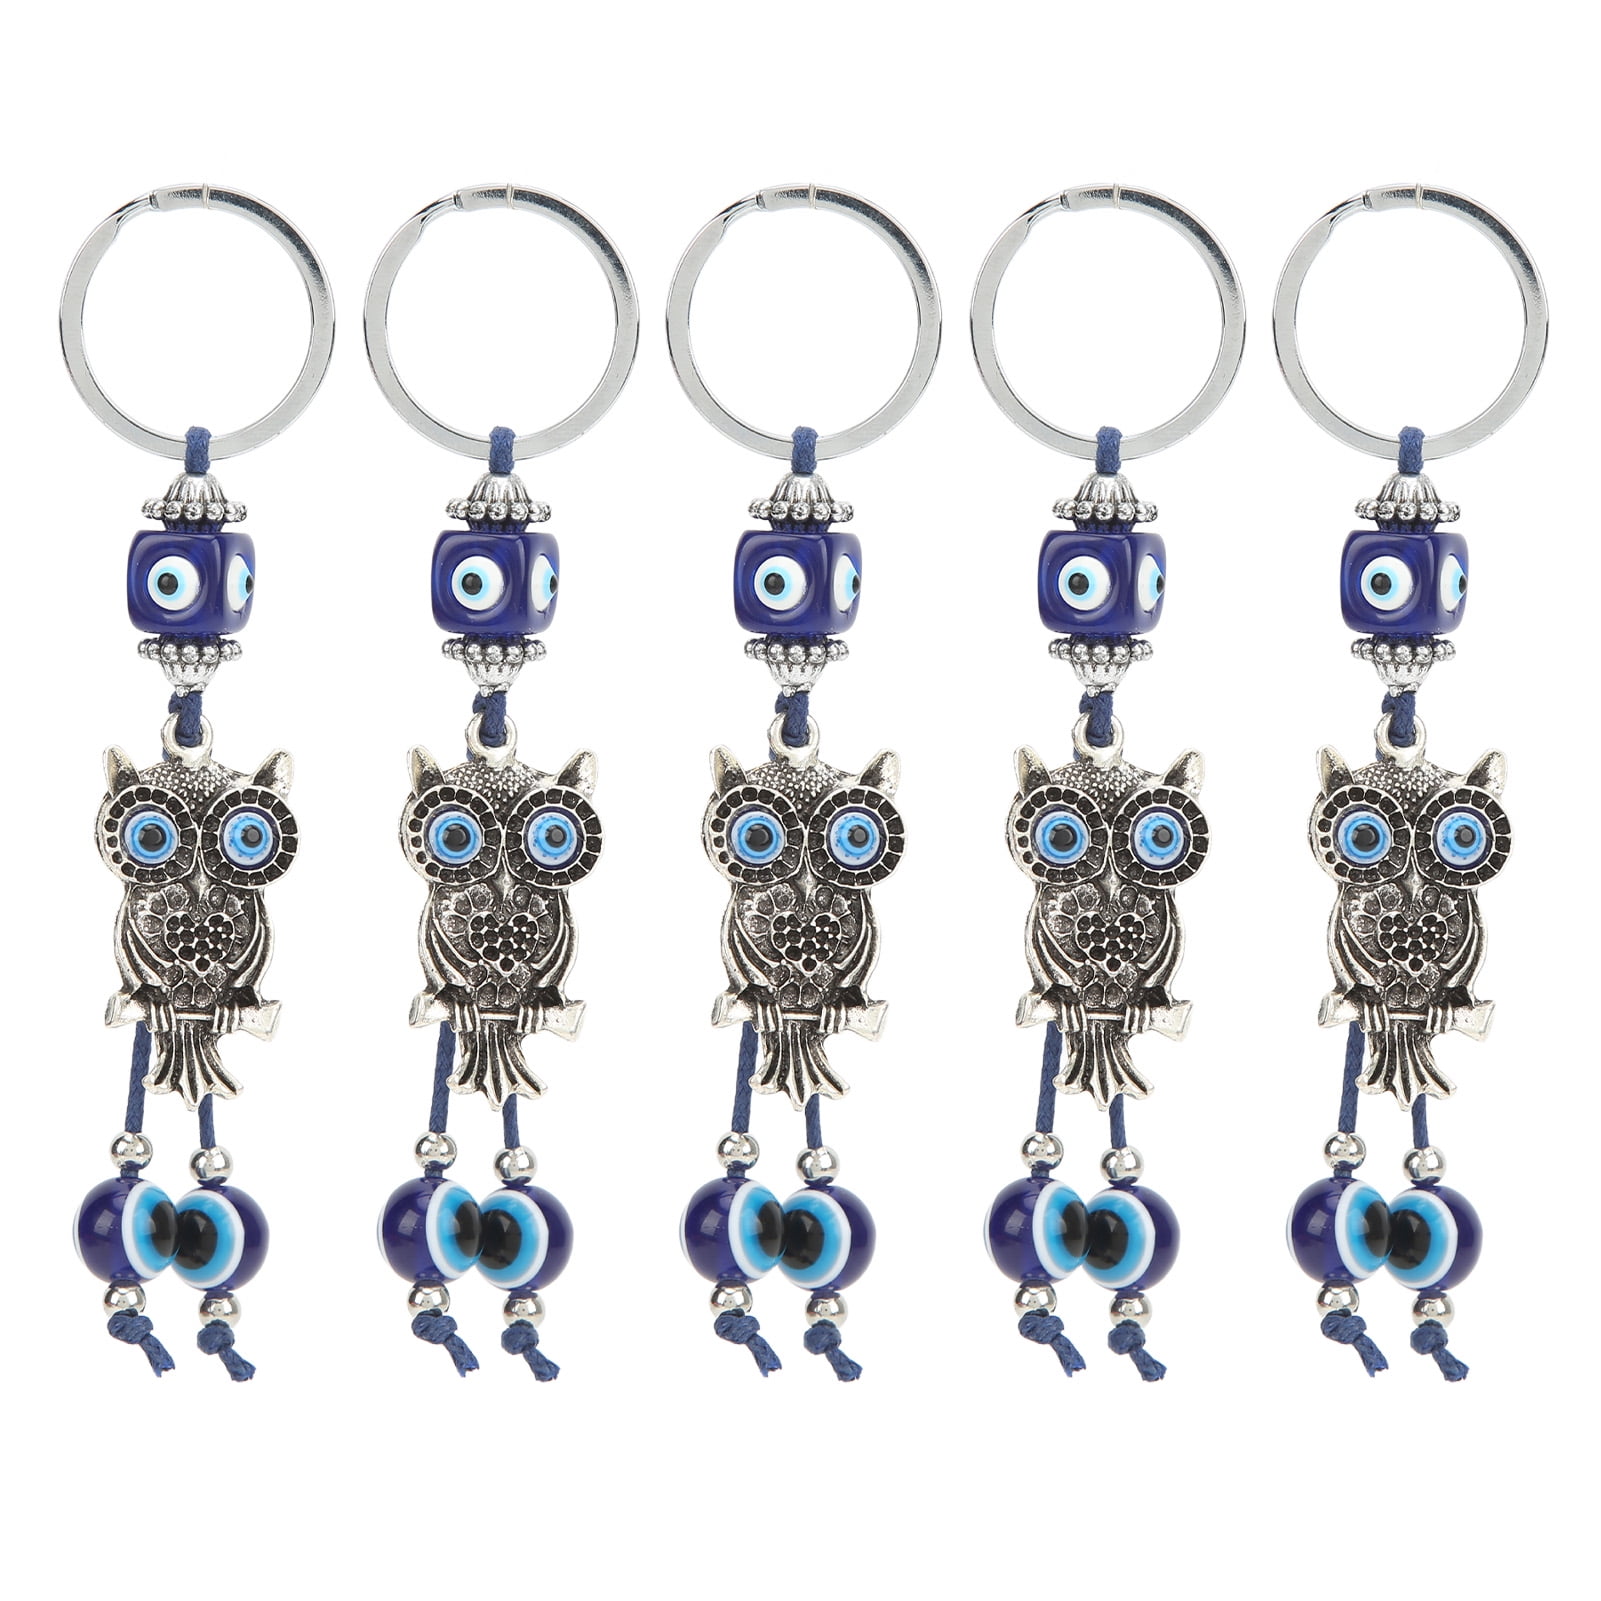 Details about   Easy Install Removable Blue Eye Keychain Gift US Seller 